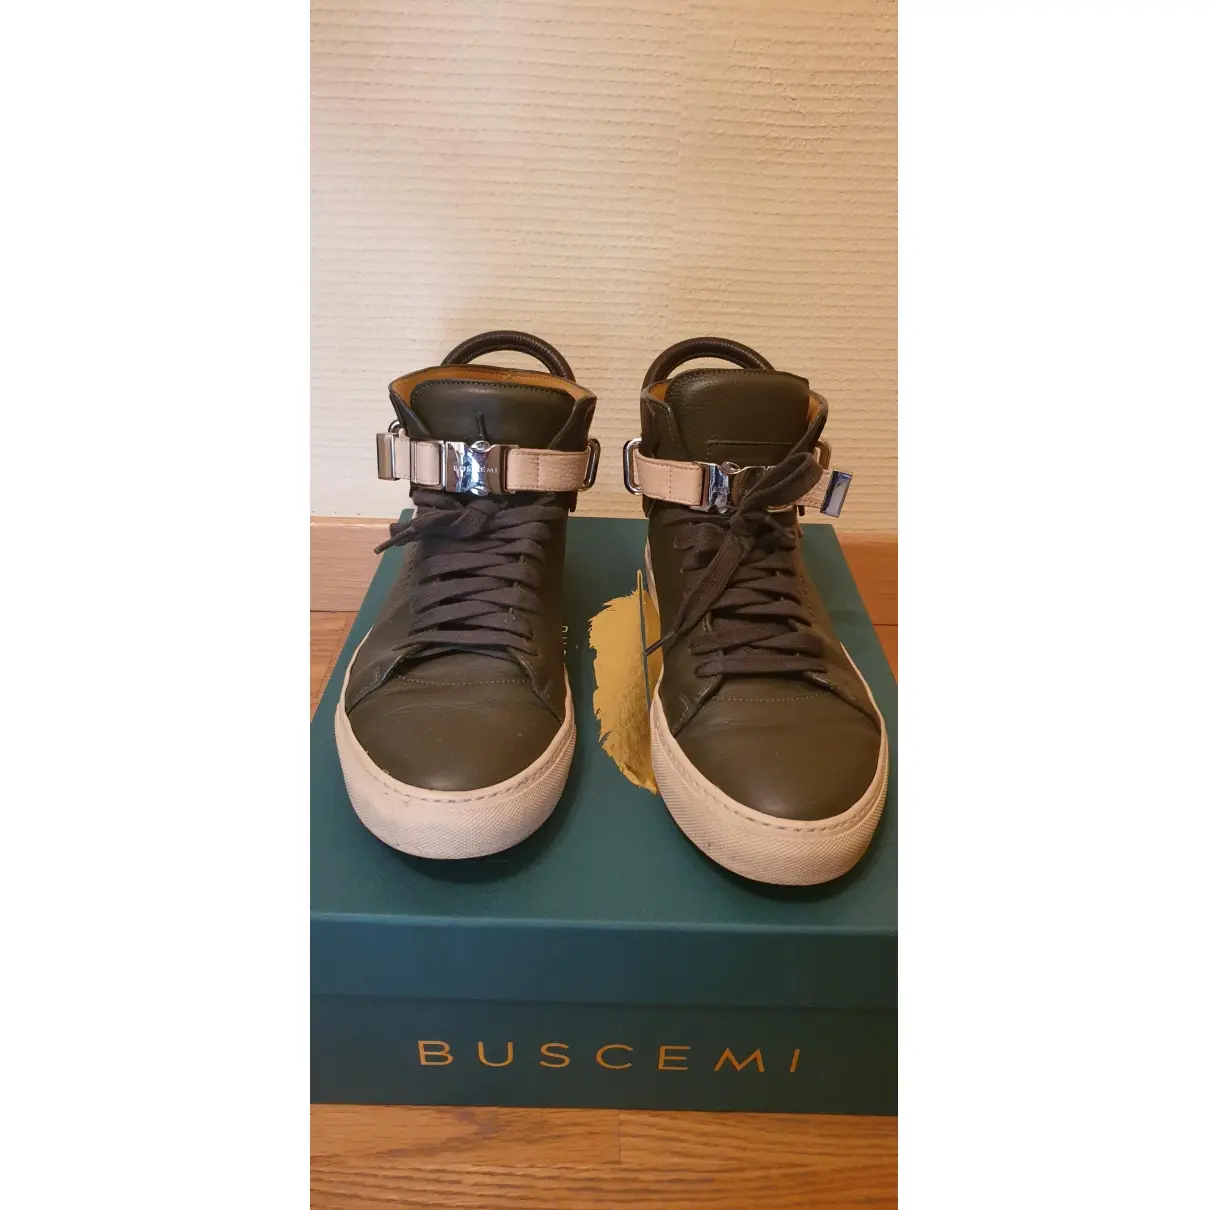 Buscemi Leather high trainers for sale